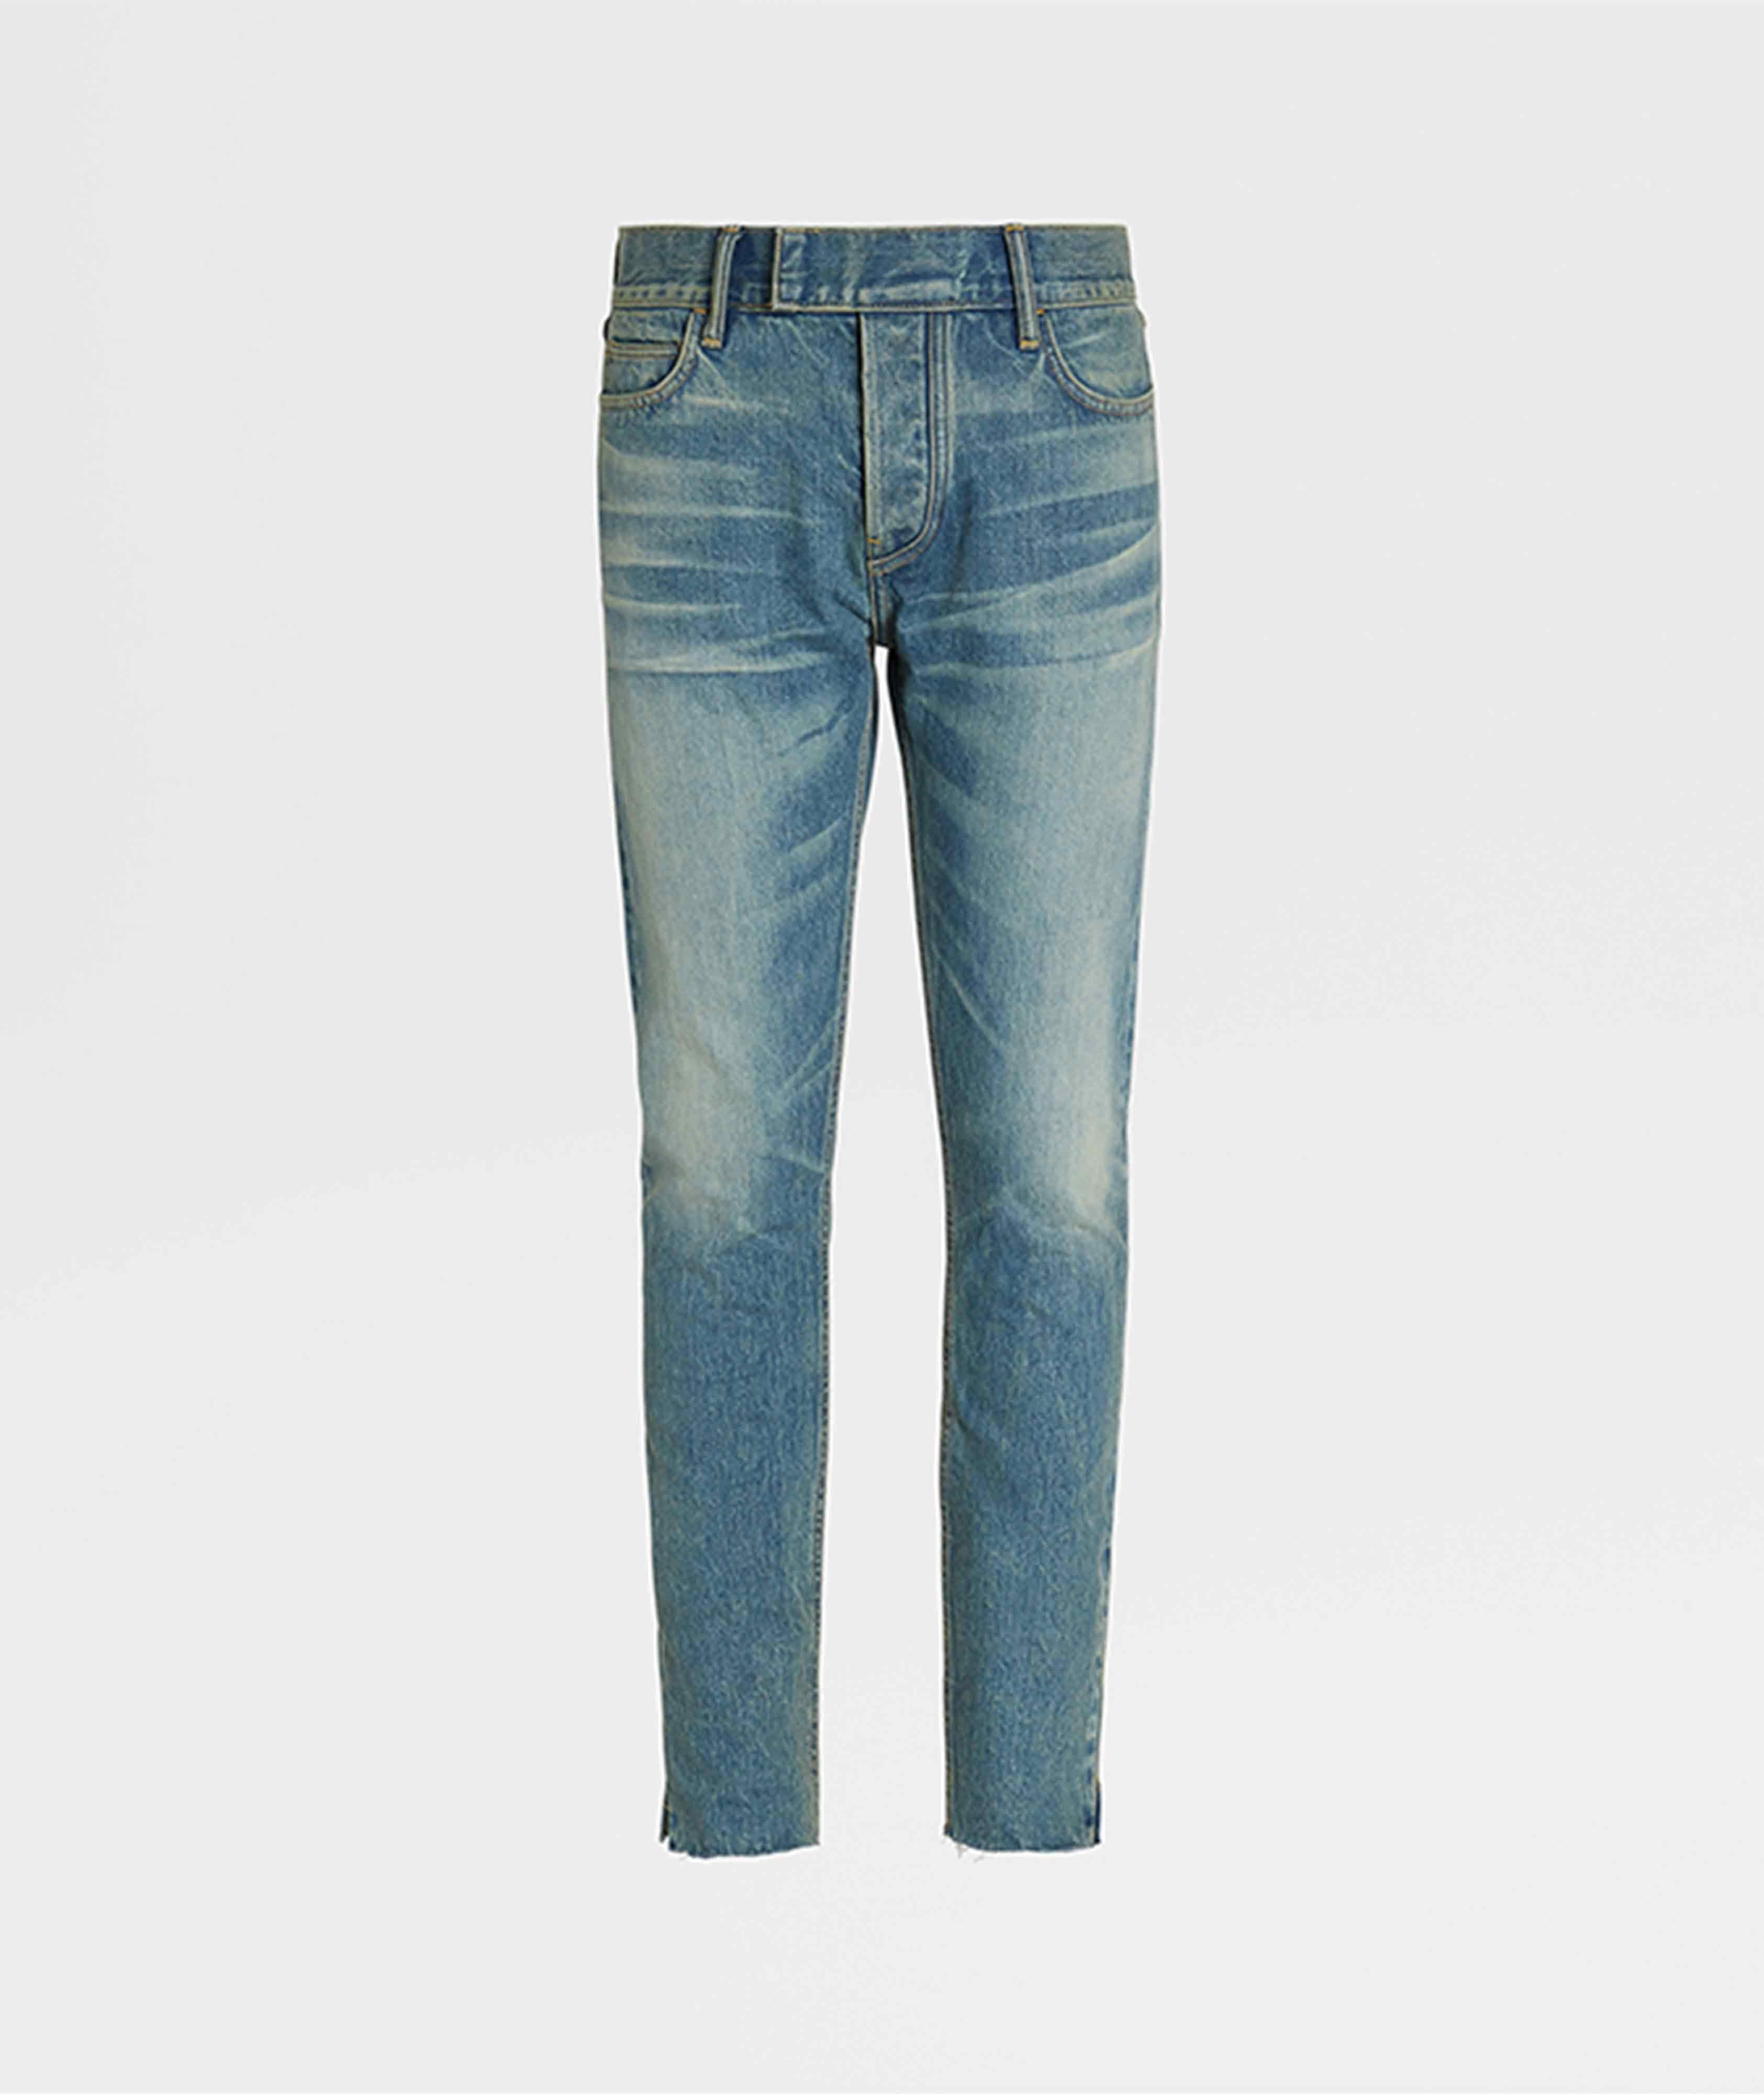 Straight-Fit Jeans image 0